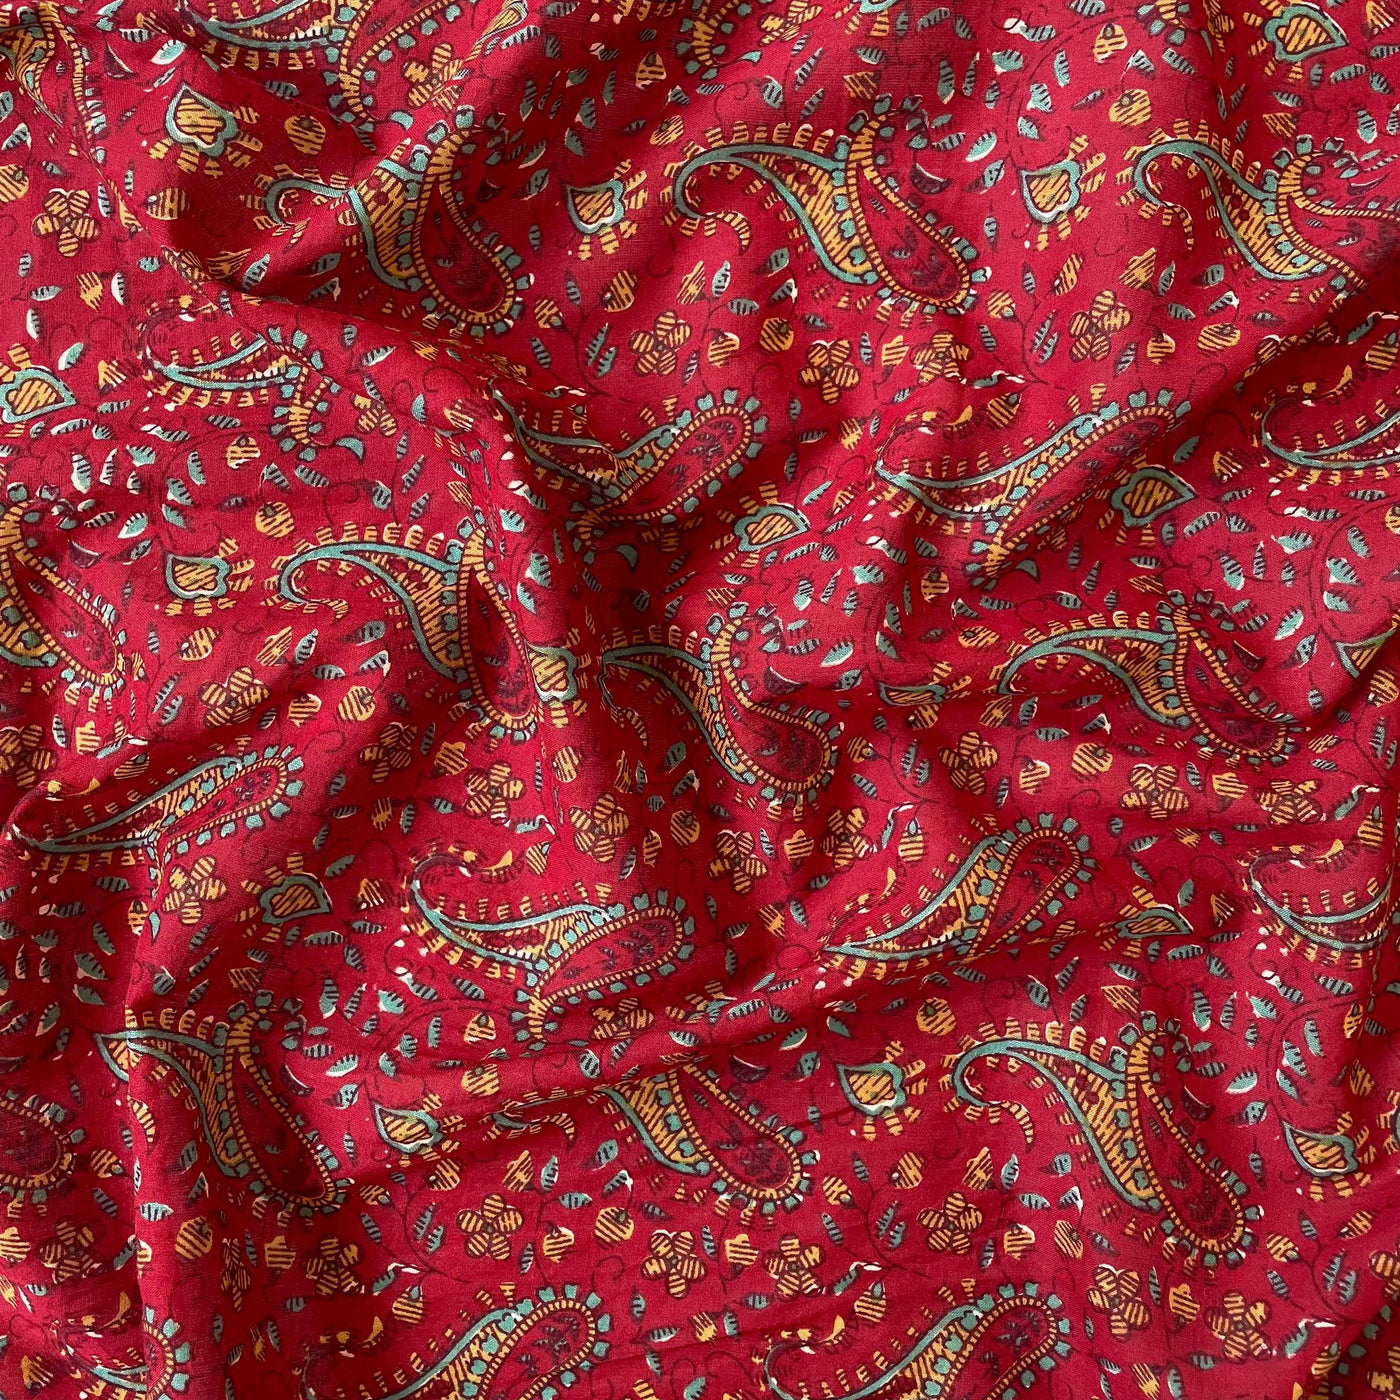 Printed Pure Mul Cotton Fabric Fabric Deep Red Vintage Moroccan paisley Hand Block Printed Pure Mul Cotton Fabric (Width 44 Inches)